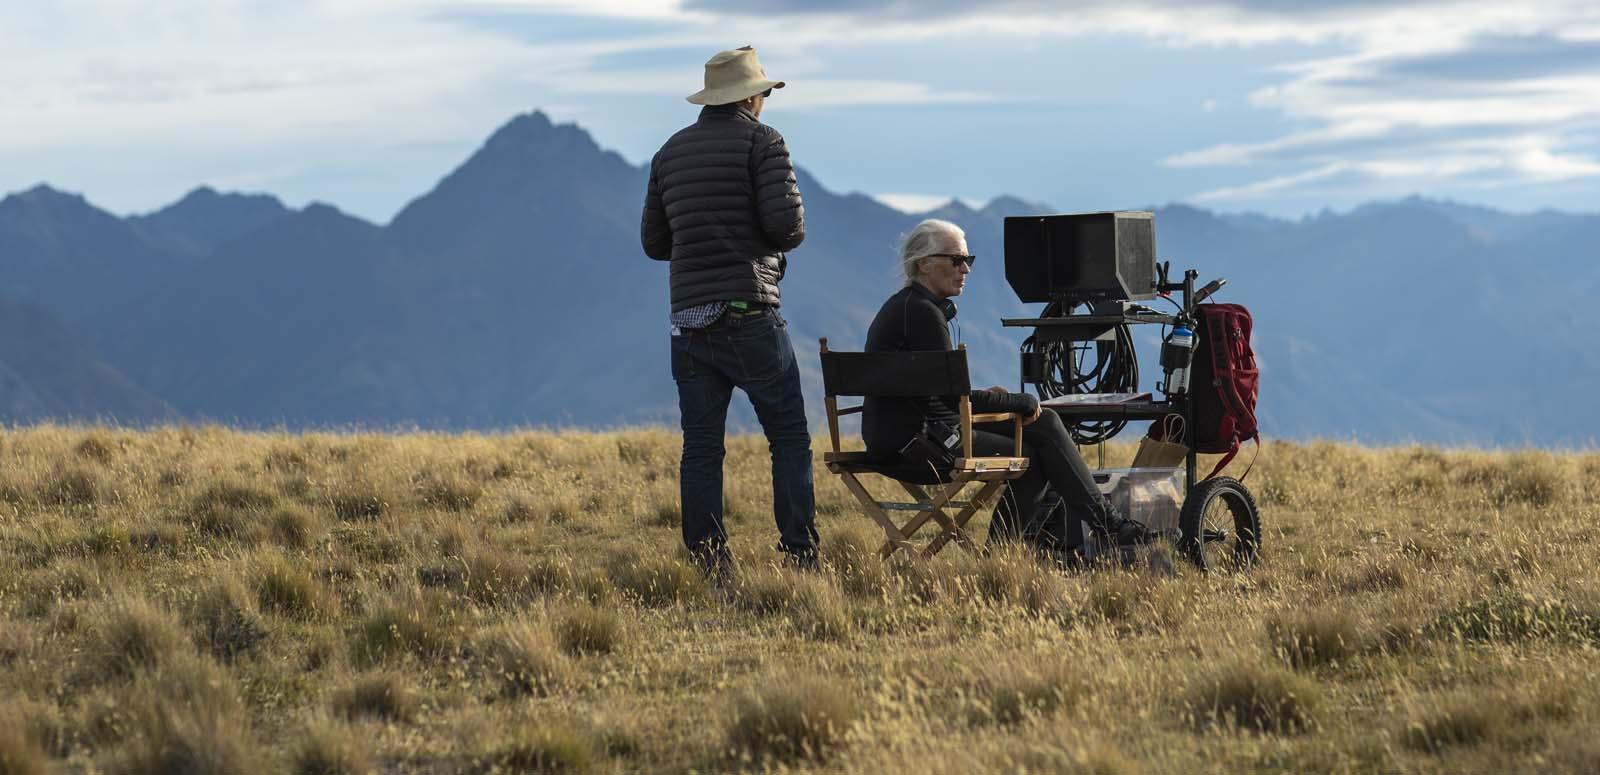 Cinematographer Ari Wegner standing next to director Jane Campion, seated at a monitor, on a grassy mountain location in New Zealand for the movie The Power of the Dog